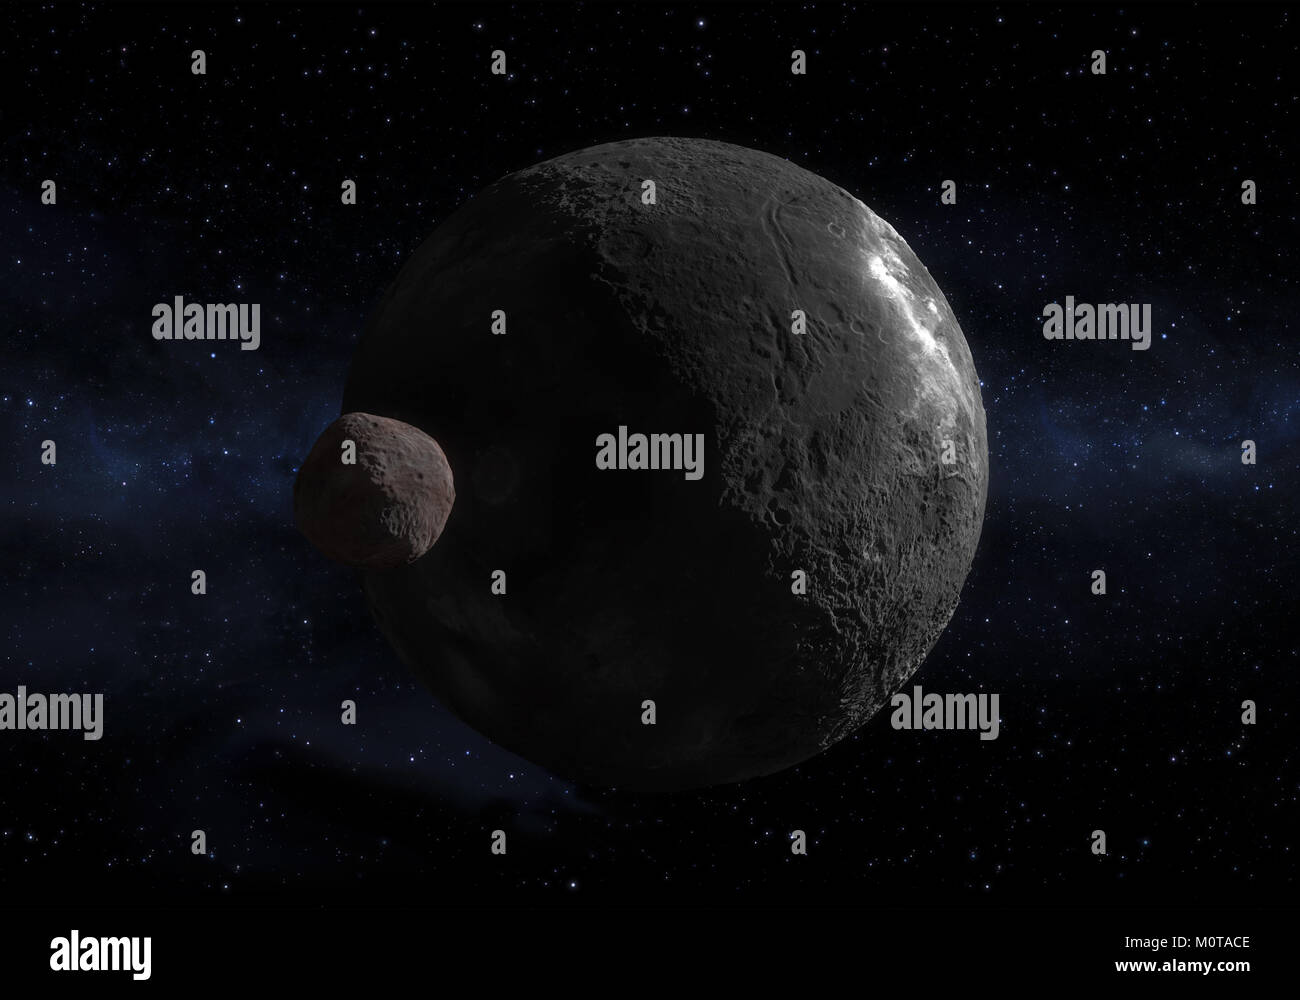 This image is a concept of the Orcus dwarf planet and your moon Vanth in a precise and scientific and artwork design.This is a 3d rendering. Stock Photo